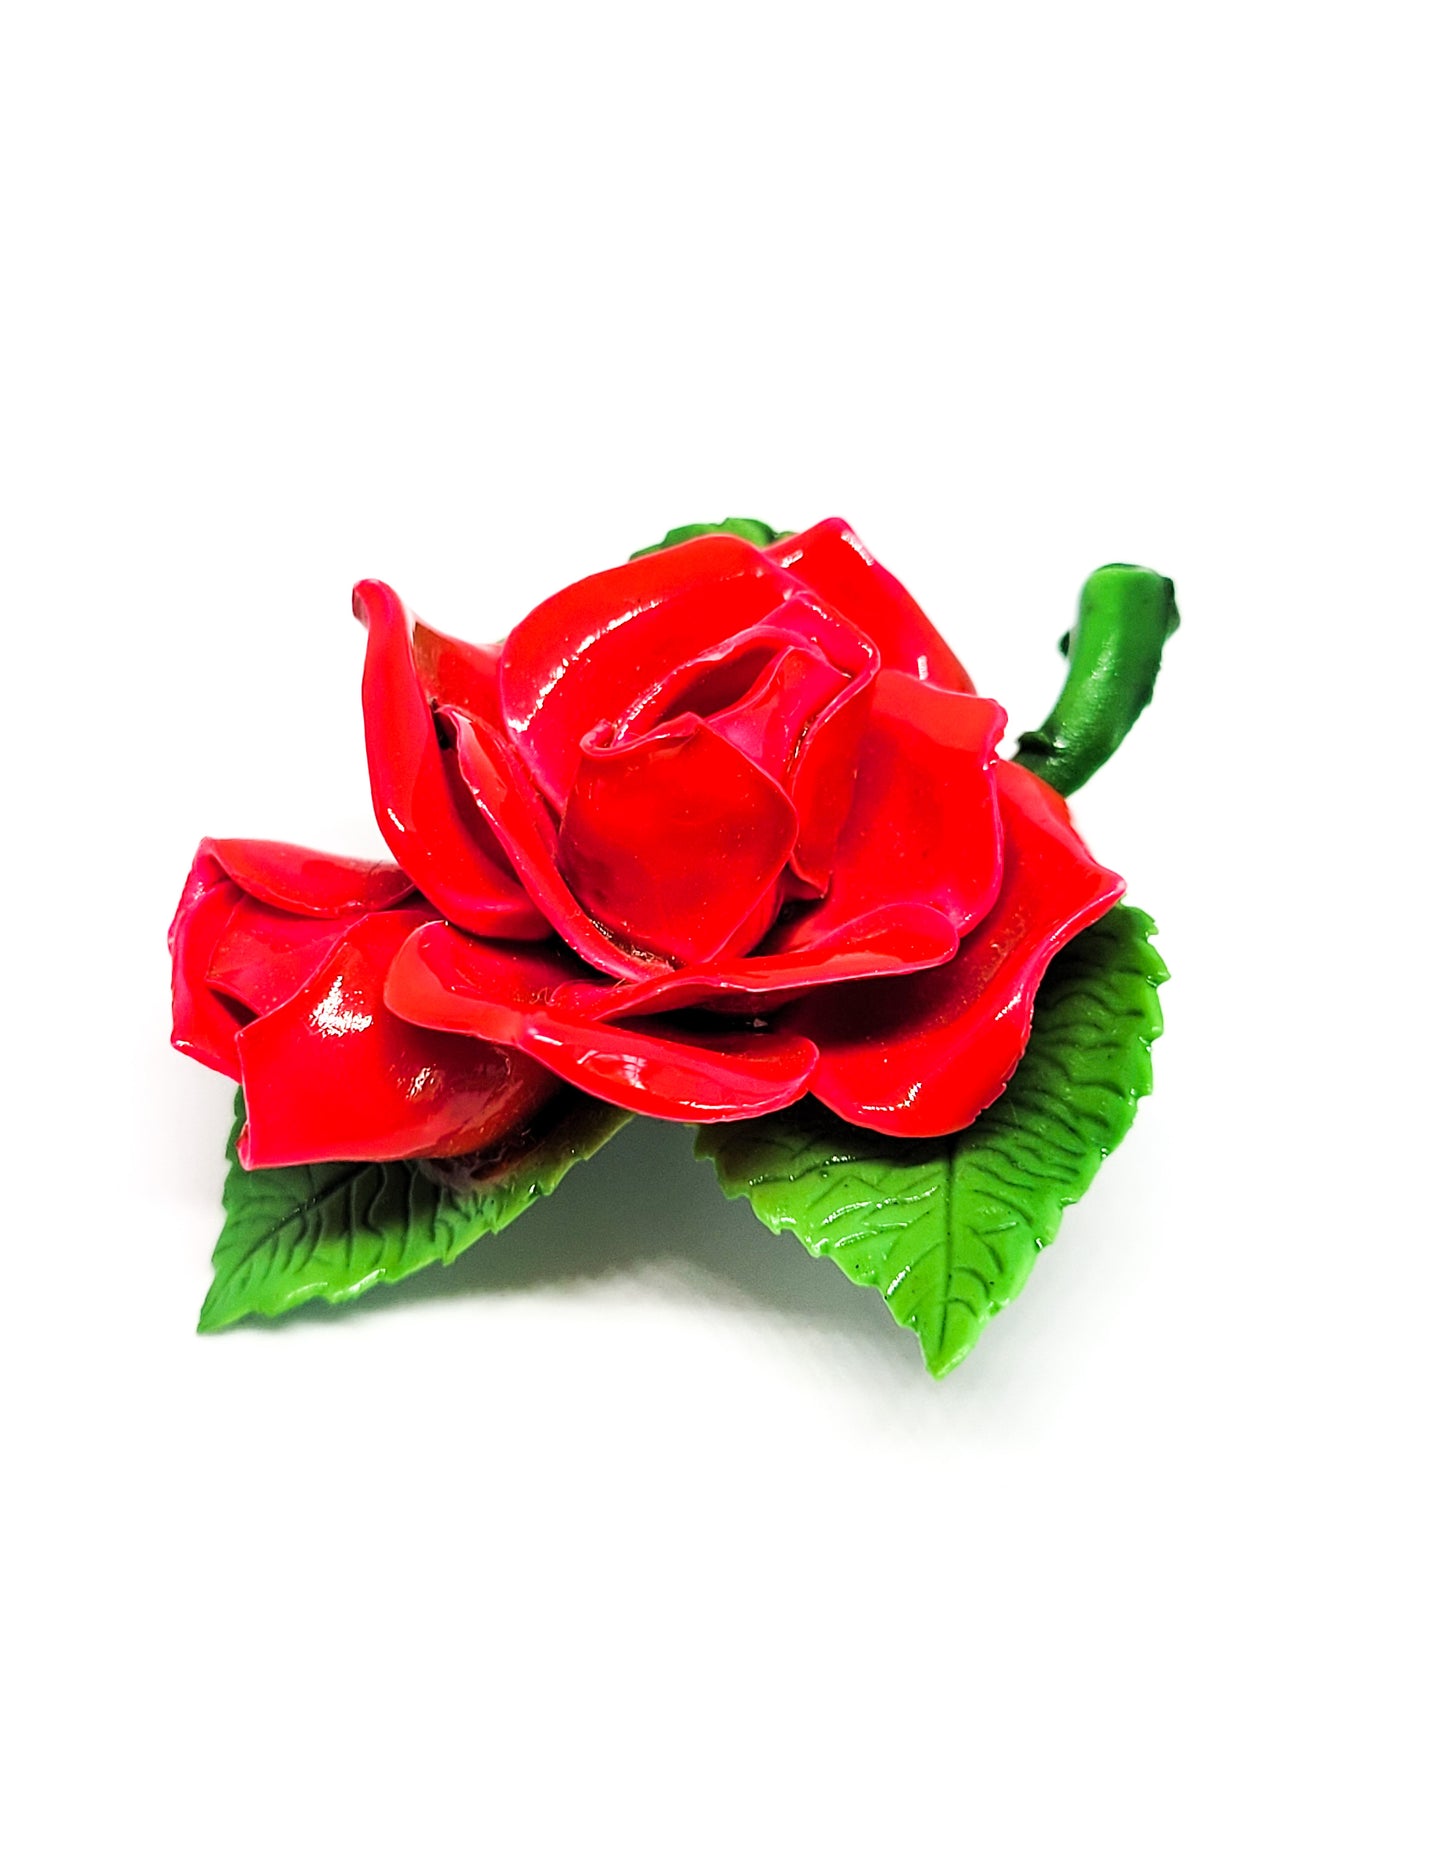 Red Rose Enamel painted vintage brooch with green leaf accents